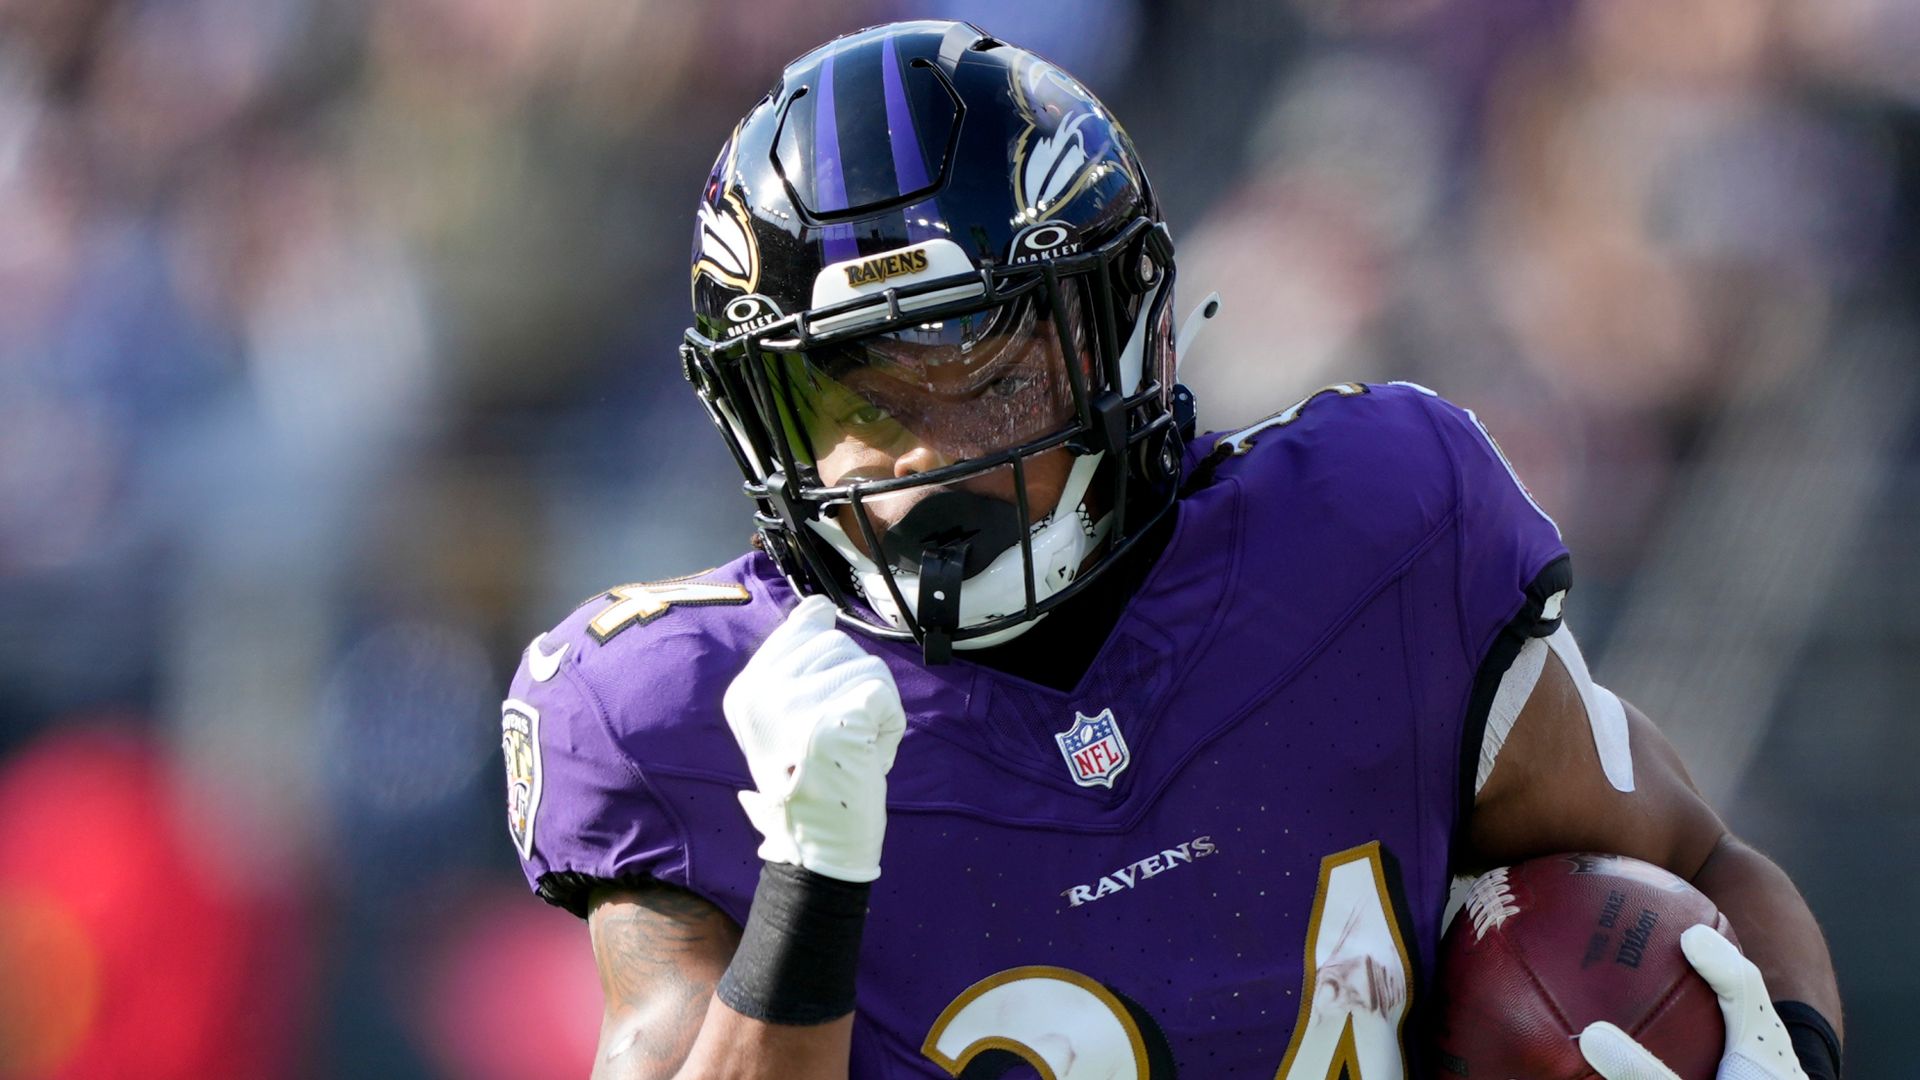 NFL fantasy football waiver wire: Mitchell shining for Ravens